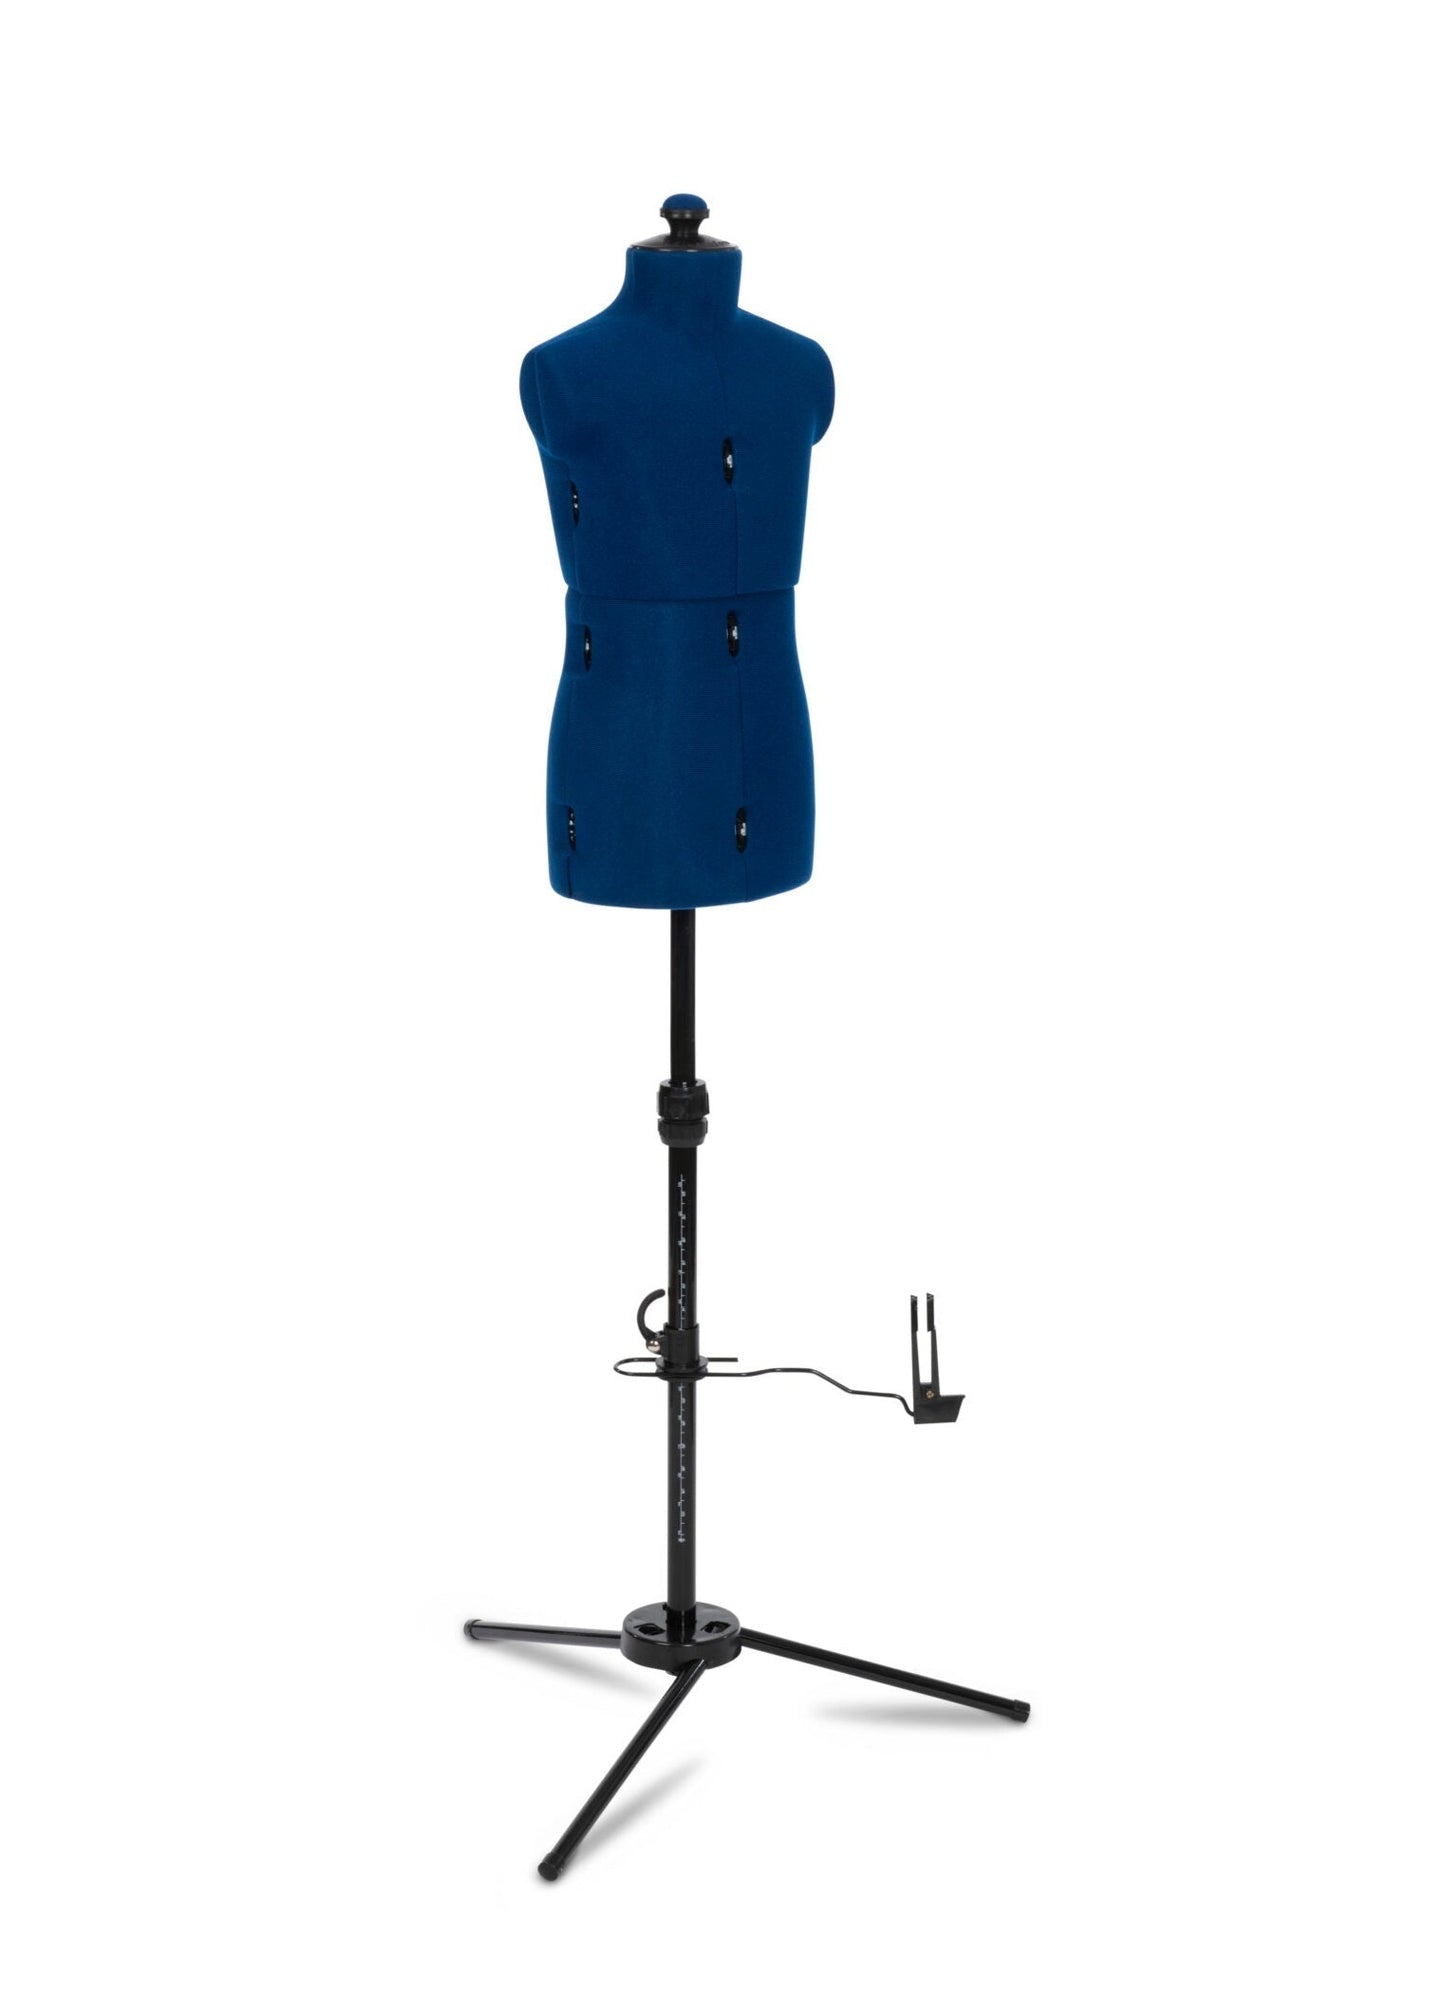 Adjustoform Junior Dressform (blue) - Adjustable dress form with metal stand (child sized 8 part body with 12 adjusters) Made in the UK